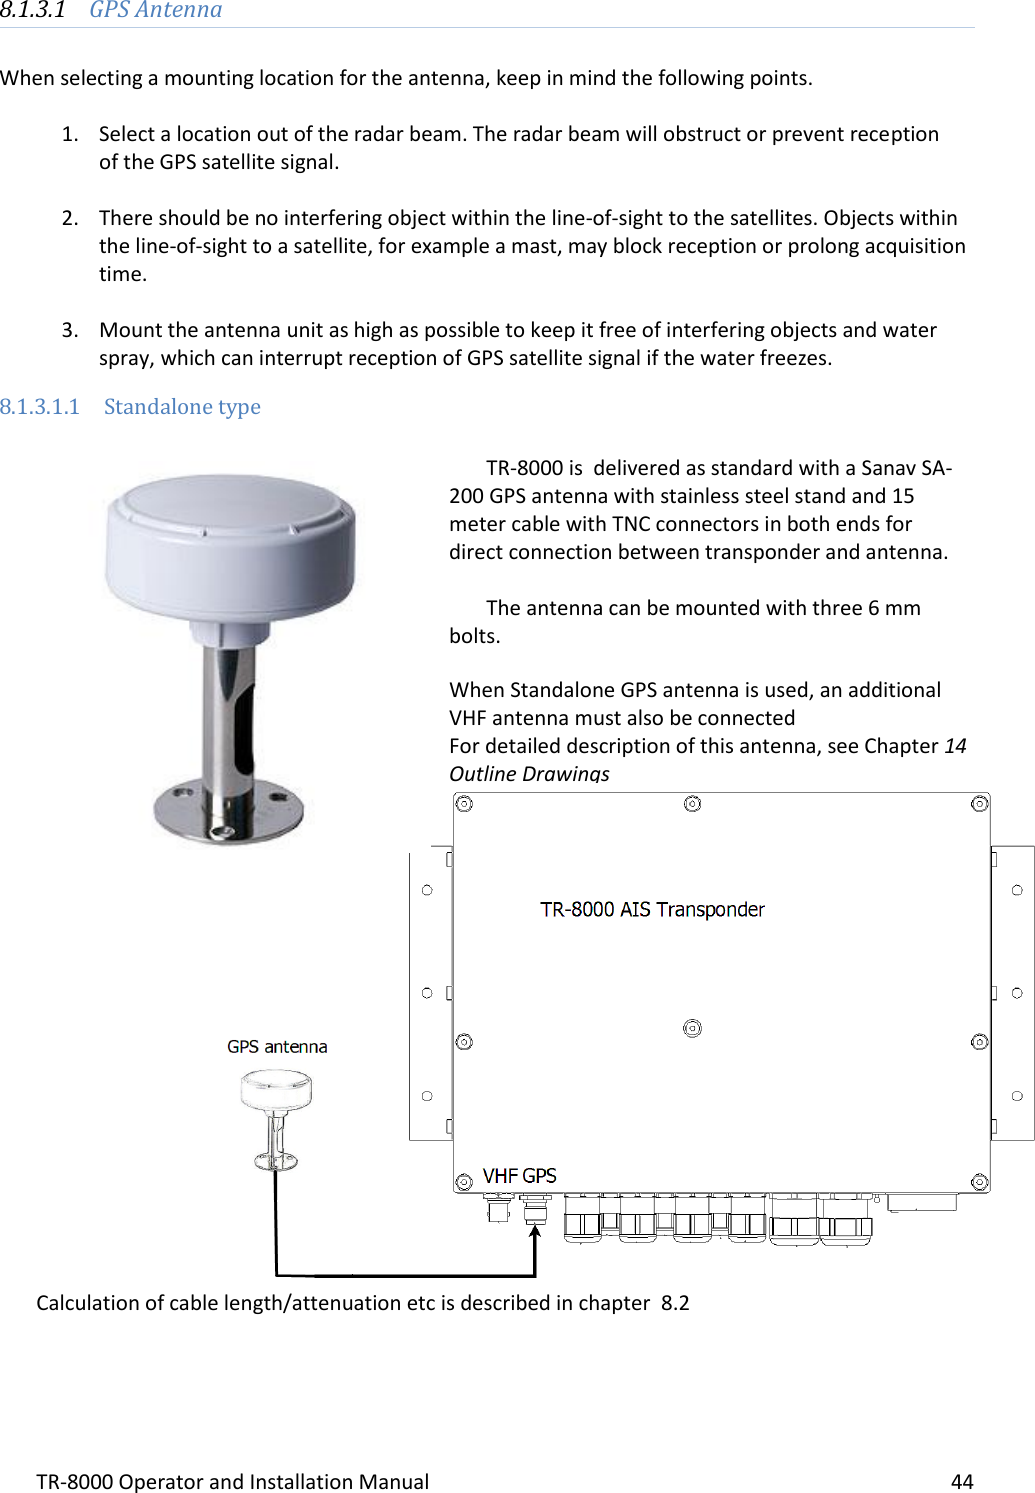 TR-8000 Operator and Installation Manual    44  8.1.3.1 GPS Antenna   When selecting a mounting location for the antenna, keep in mind the following points.  1. Select a location out of the radar beam. The radar beam will obstruct or prevent reception   of the GPS satellite signal.  2. There should be no interfering object within the line-of-sight to the satellites. Objects within the line-of-sight to a satellite, for example a mast, may block reception or prolong acquisition time.  3. Mount the antenna unit as high as possible to keep it free of interfering objects and water spray, which can interrupt reception of GPS satellite signal if the water freezes. 8.1.3.1.1 Standalone type   TR-8000 is  delivered as standard with a Sanav SA-200 GPS antenna with stainless steel stand and 15 meter cable with TNC connectors in both ends for direct connection between transponder and antenna.  The antenna can be mounted with three 6 mm bolts.  When Standalone GPS antenna is used, an additional VHF antenna must also be connected For detailed description of this antenna, see Chapter 14 Outline Drawings                    Calculation of cable length/attenuation etc is described in chapter  8.2    